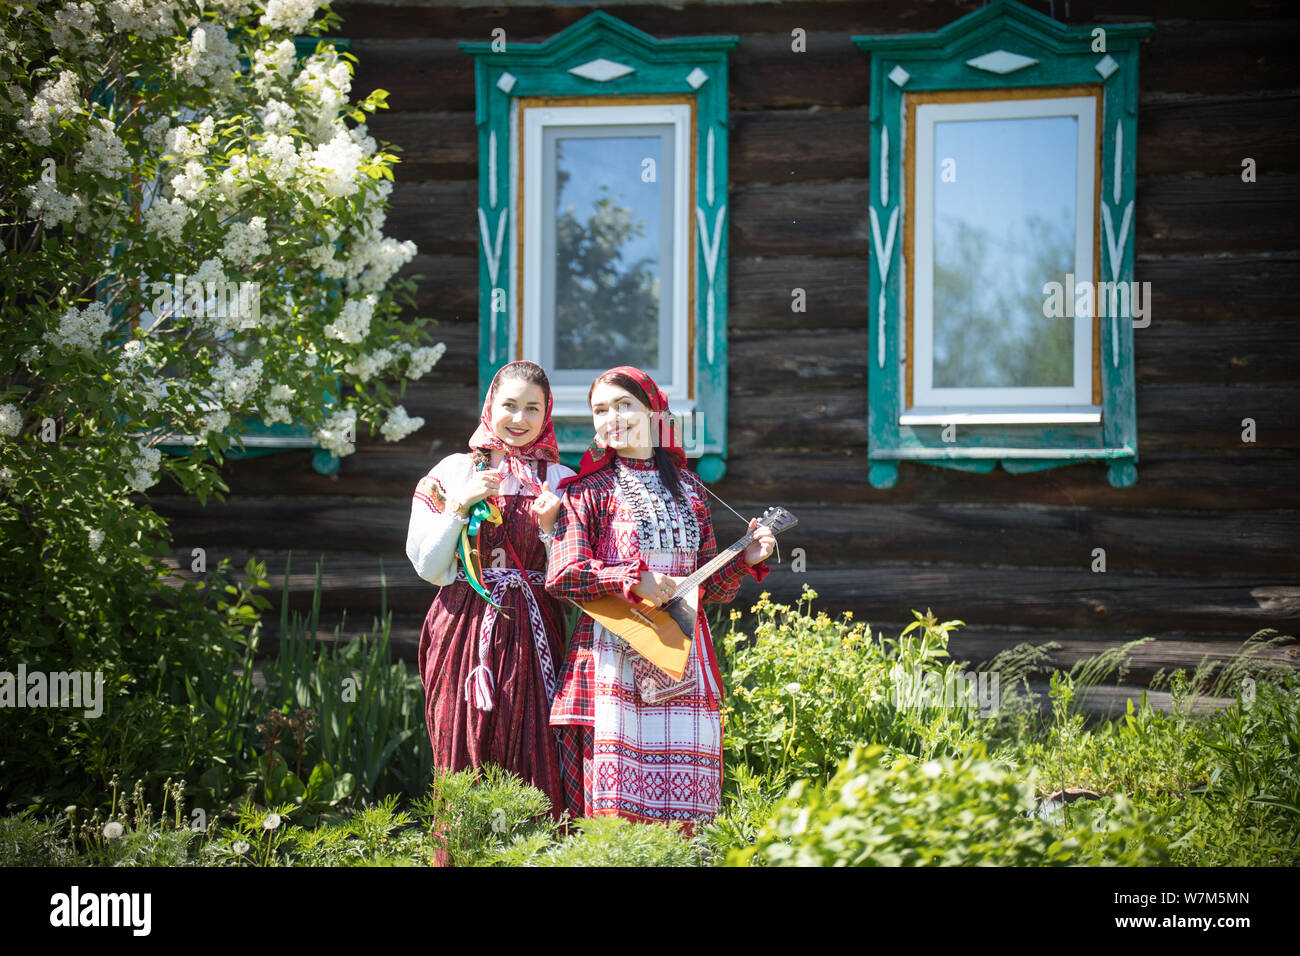 Two young women in traditional russian clothes stand in front of a ...